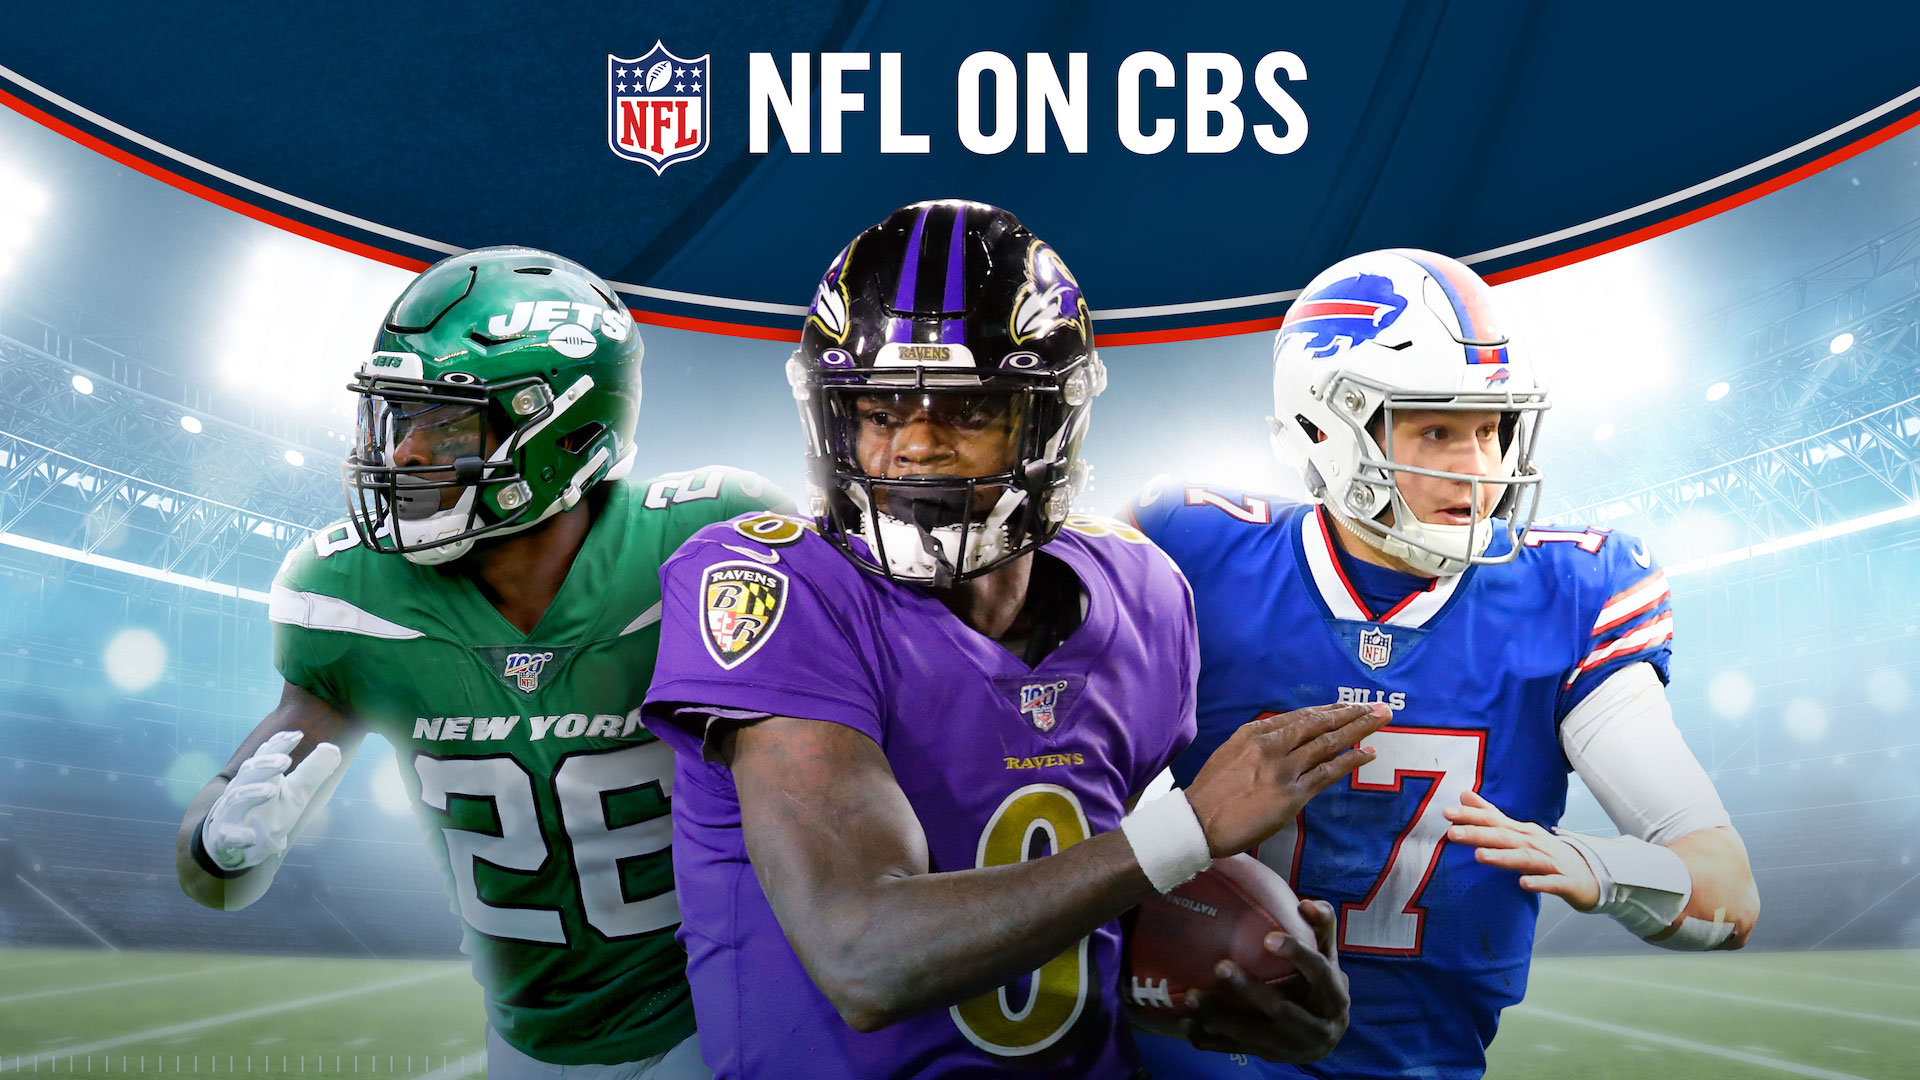 2020 Nfl On Cbs Schedule Watch Live Football Games With Cbs All Access